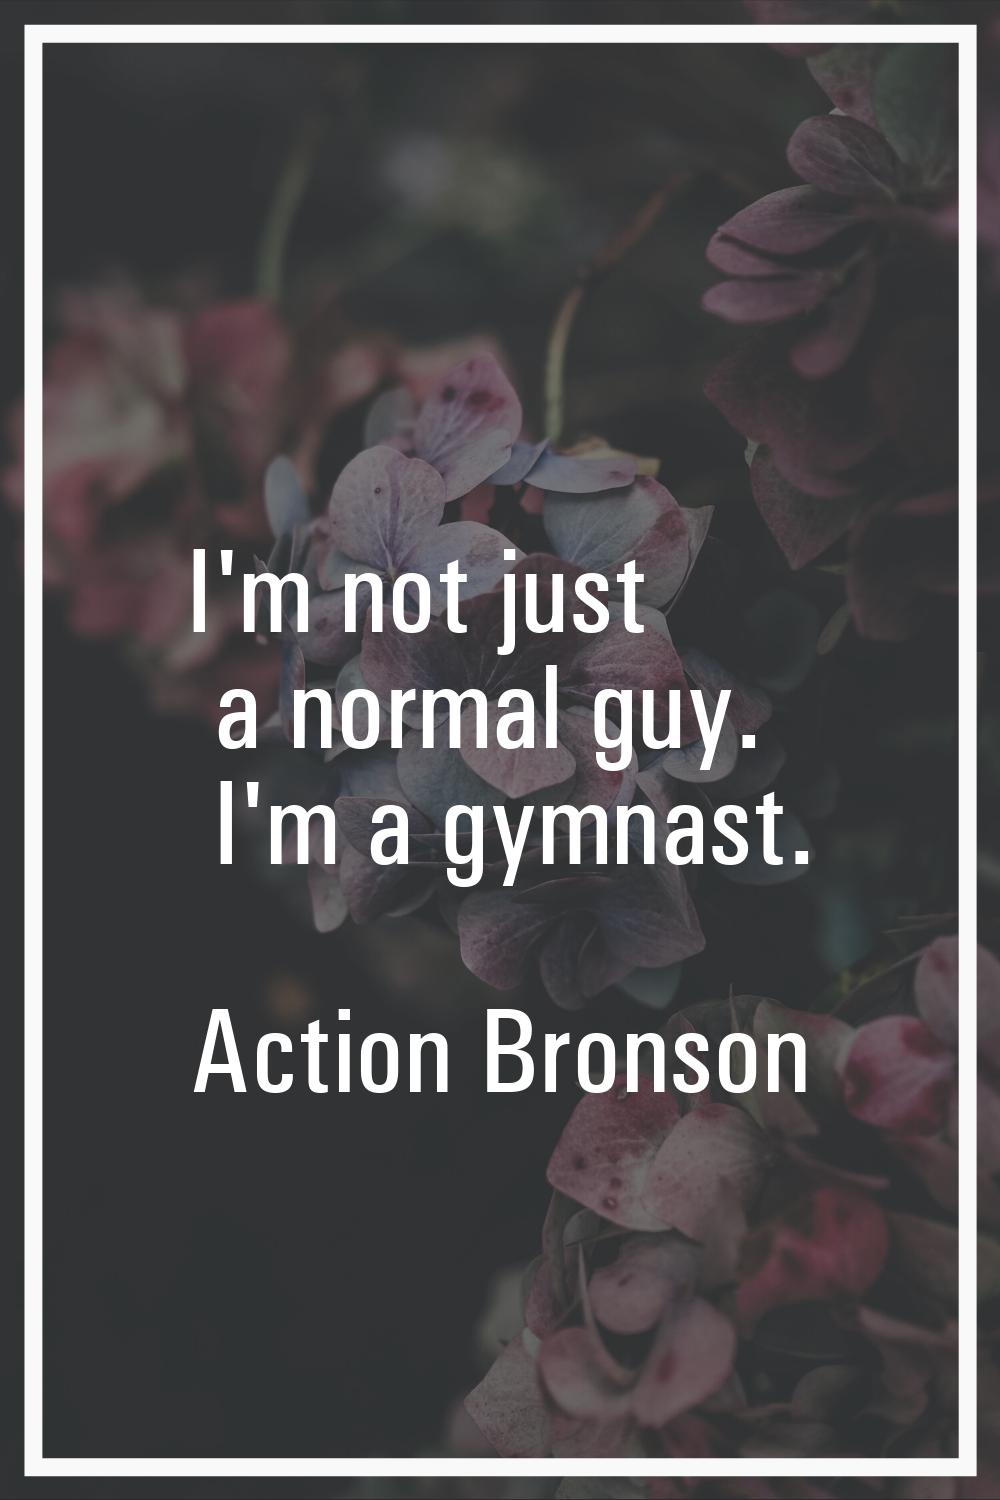 I'm not just a normal guy. I'm a gymnast.